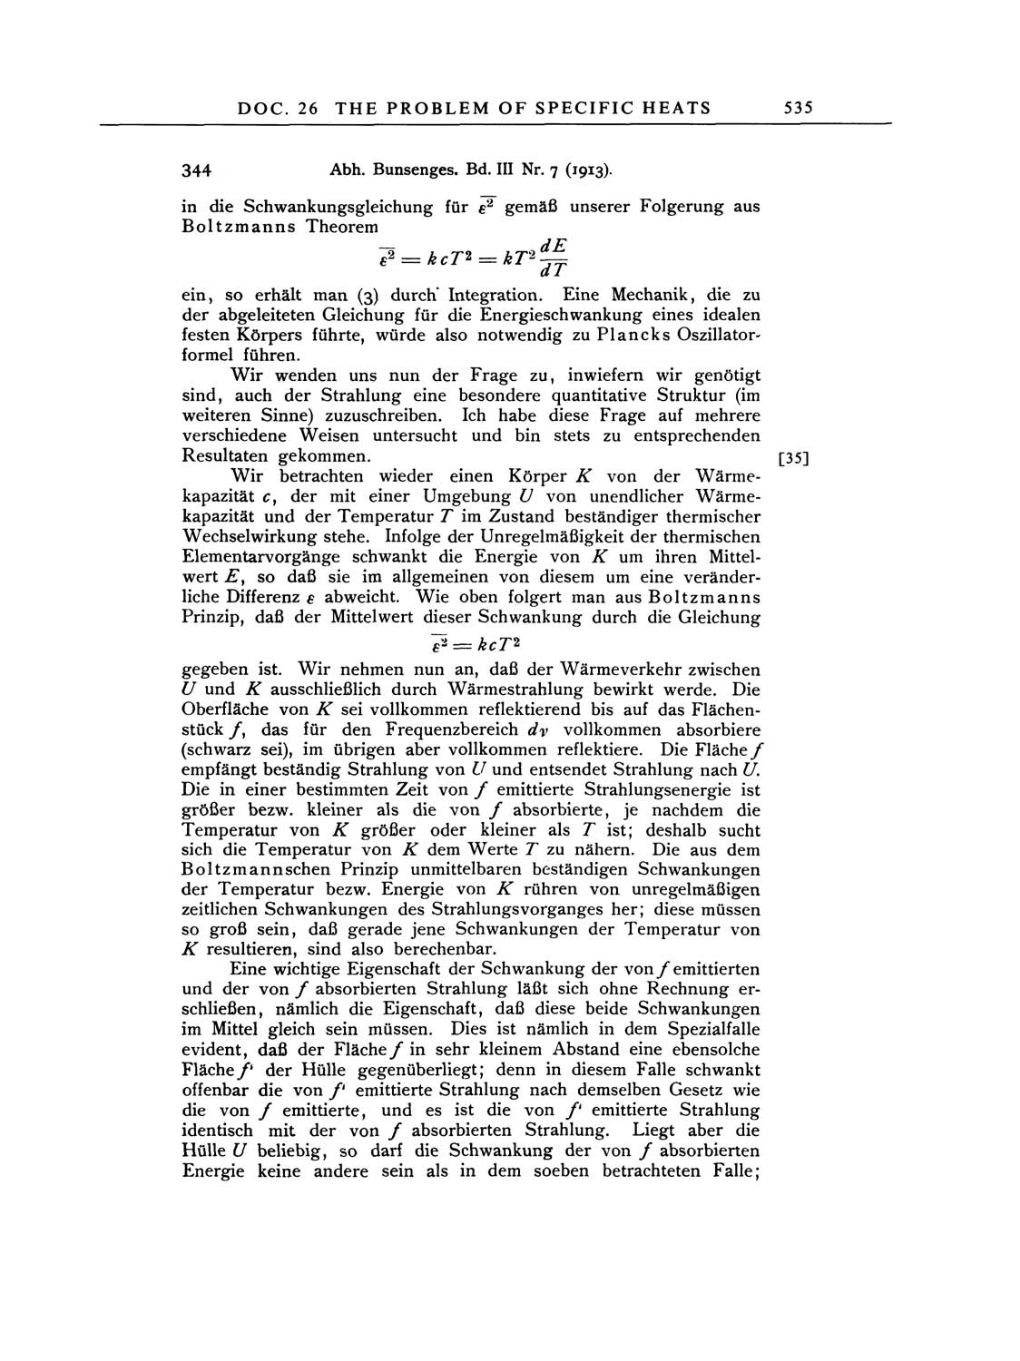 Volume 3: The Swiss Years: Writings 1909-1911 page 535